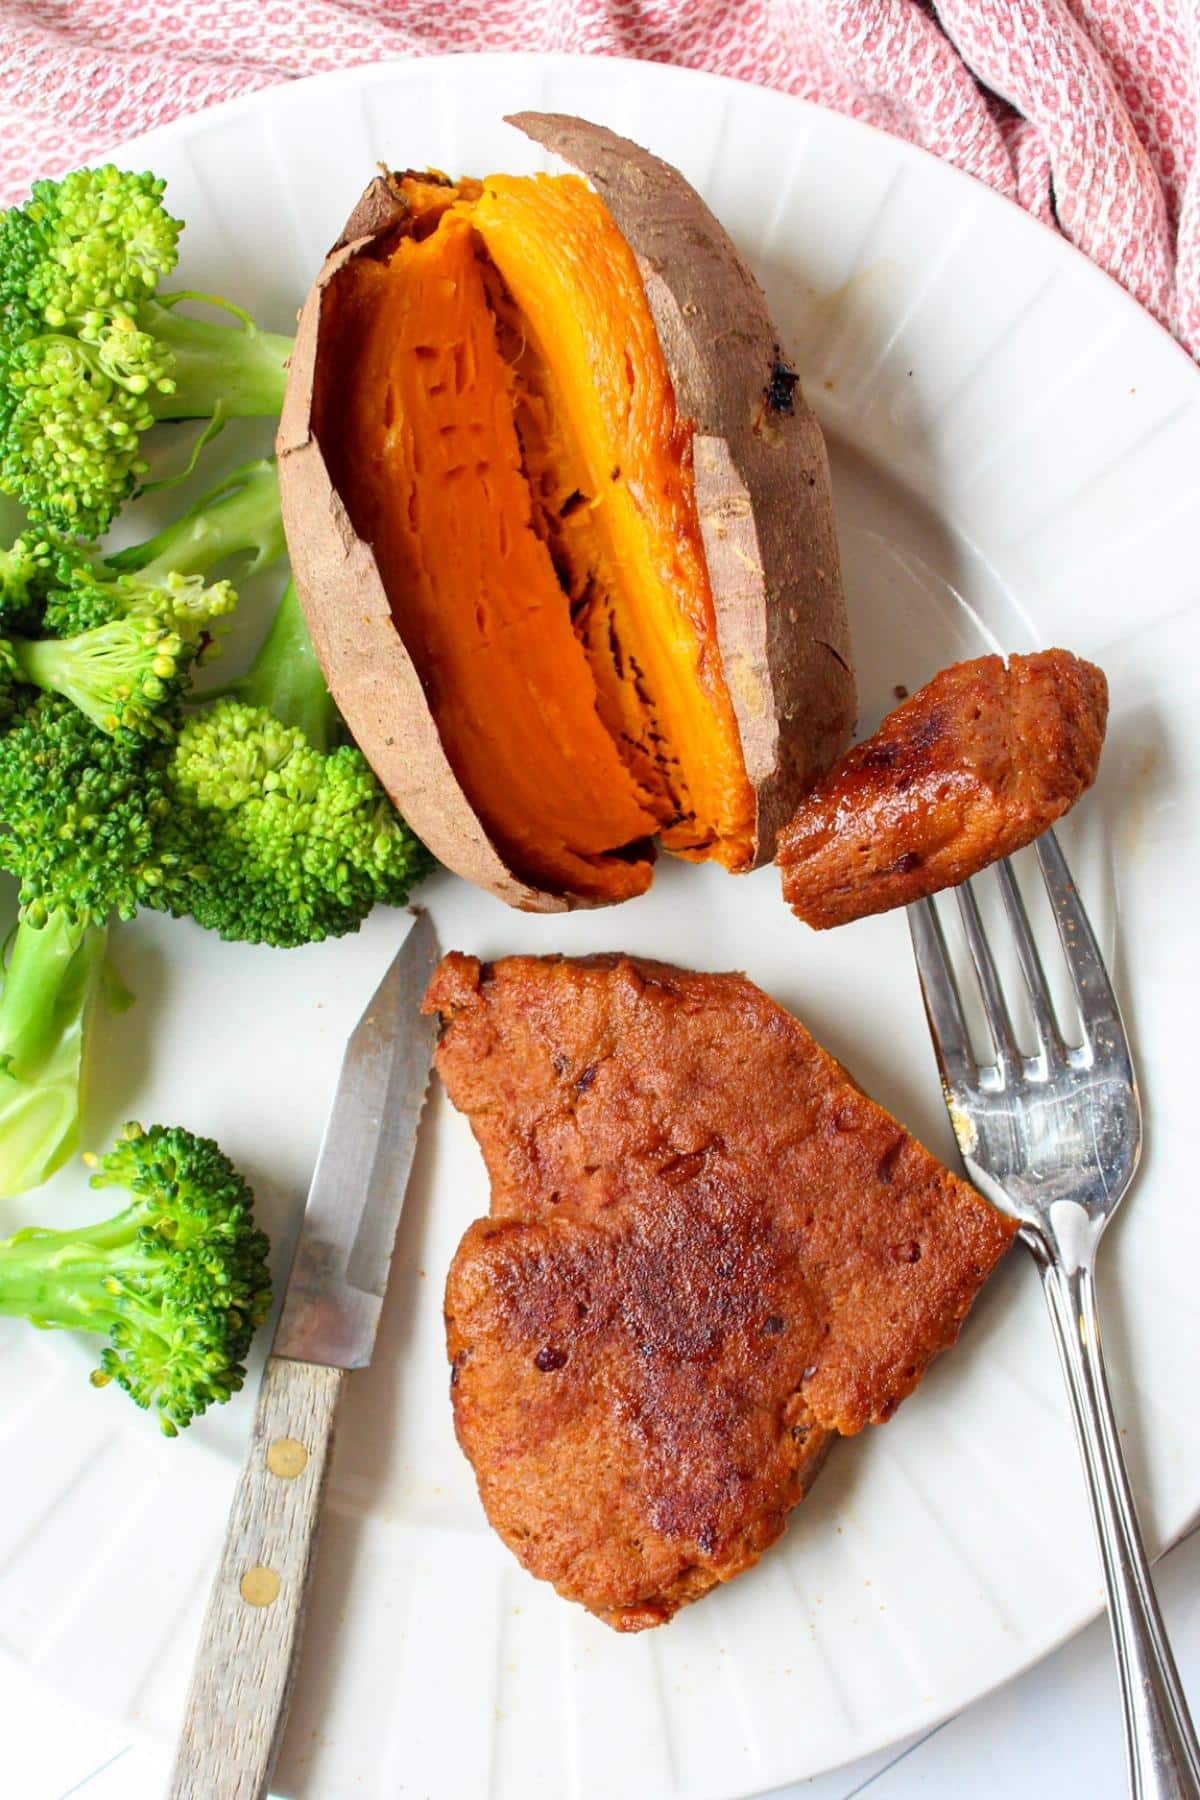 Piece of vegan steak on a plate with broccoli and a baked sweet potato.